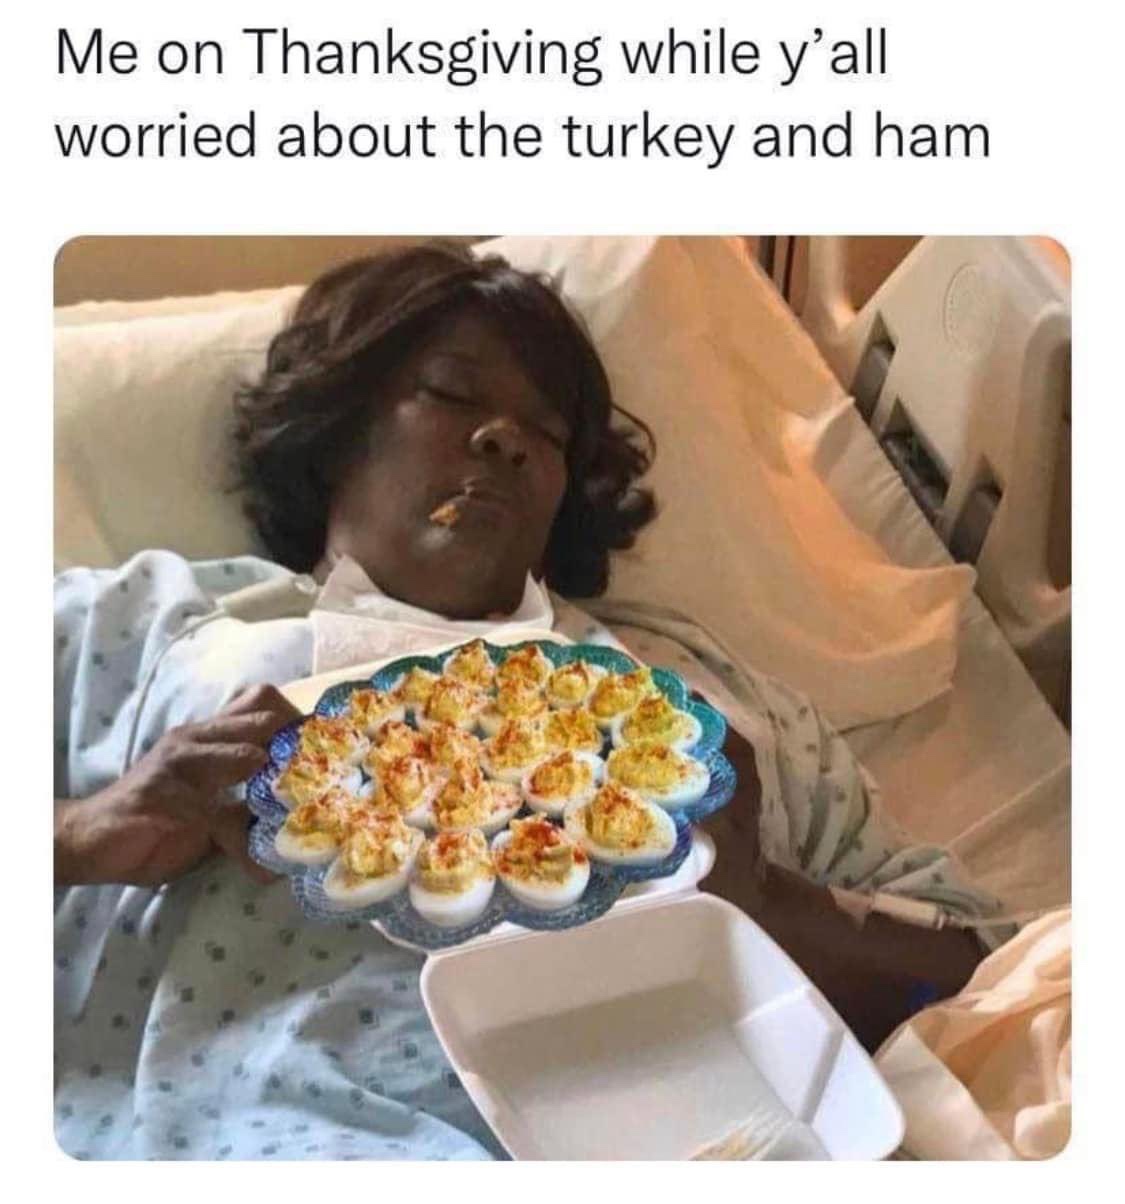 Me on Thanksgiving while y'all worried aobut the turkey and ham deviled eggs meme